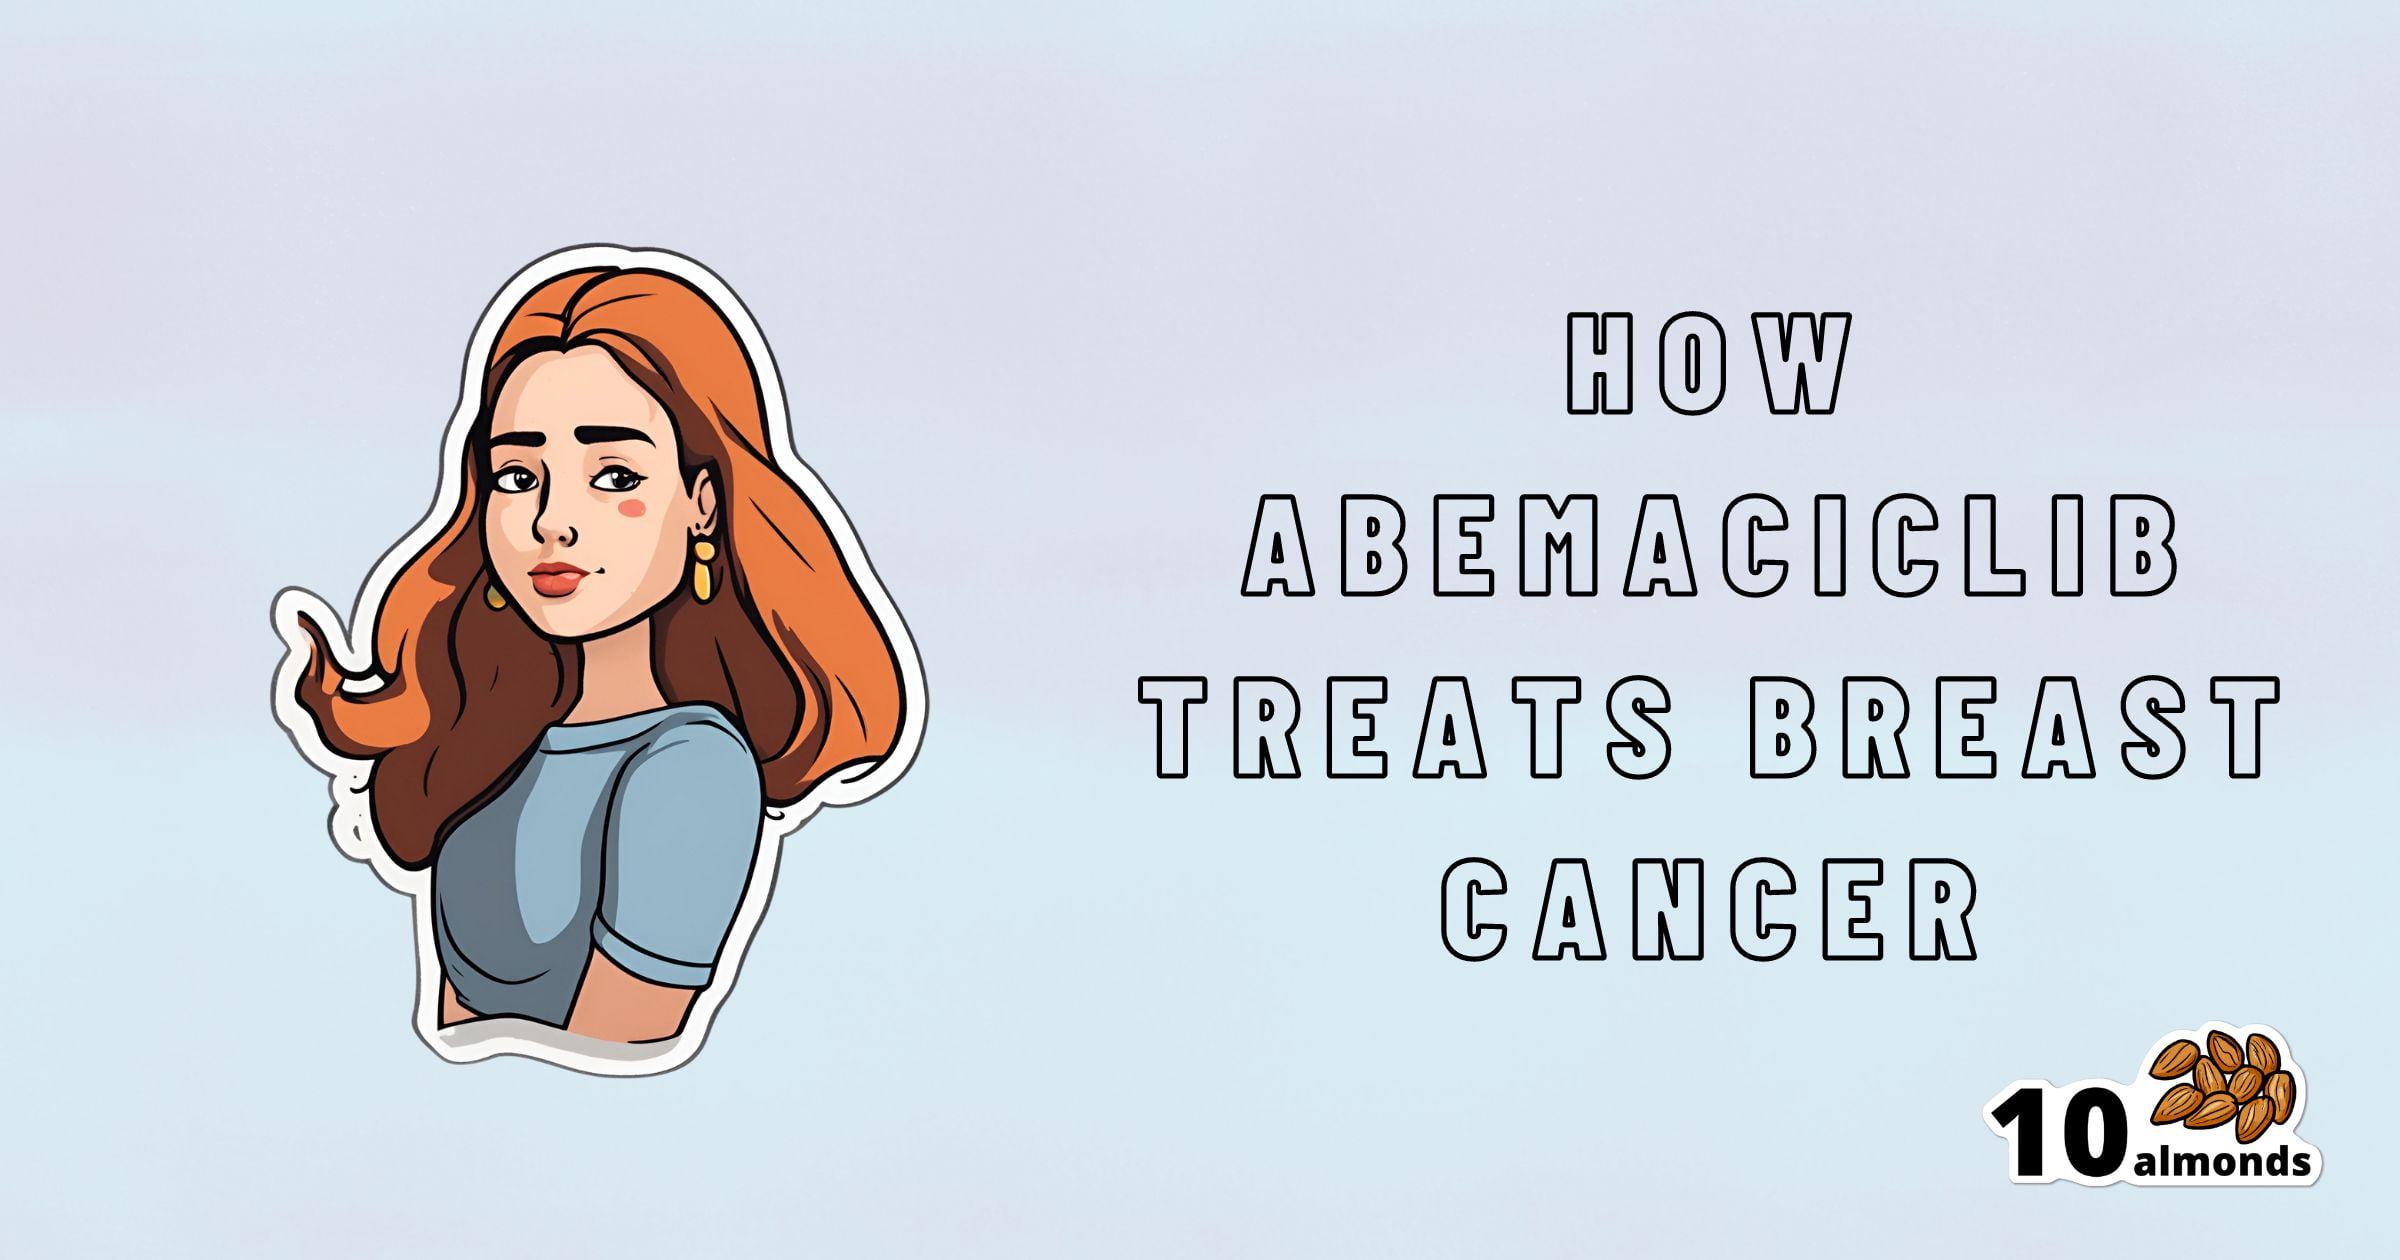 An illustration of a woman with long, wavy hair wearing a blue shirt is on the left side of the image. On the right, the text reads "How Abemaciclib Treats Breast Cancer," with a "10 almonds" logo in the bottom right corner.